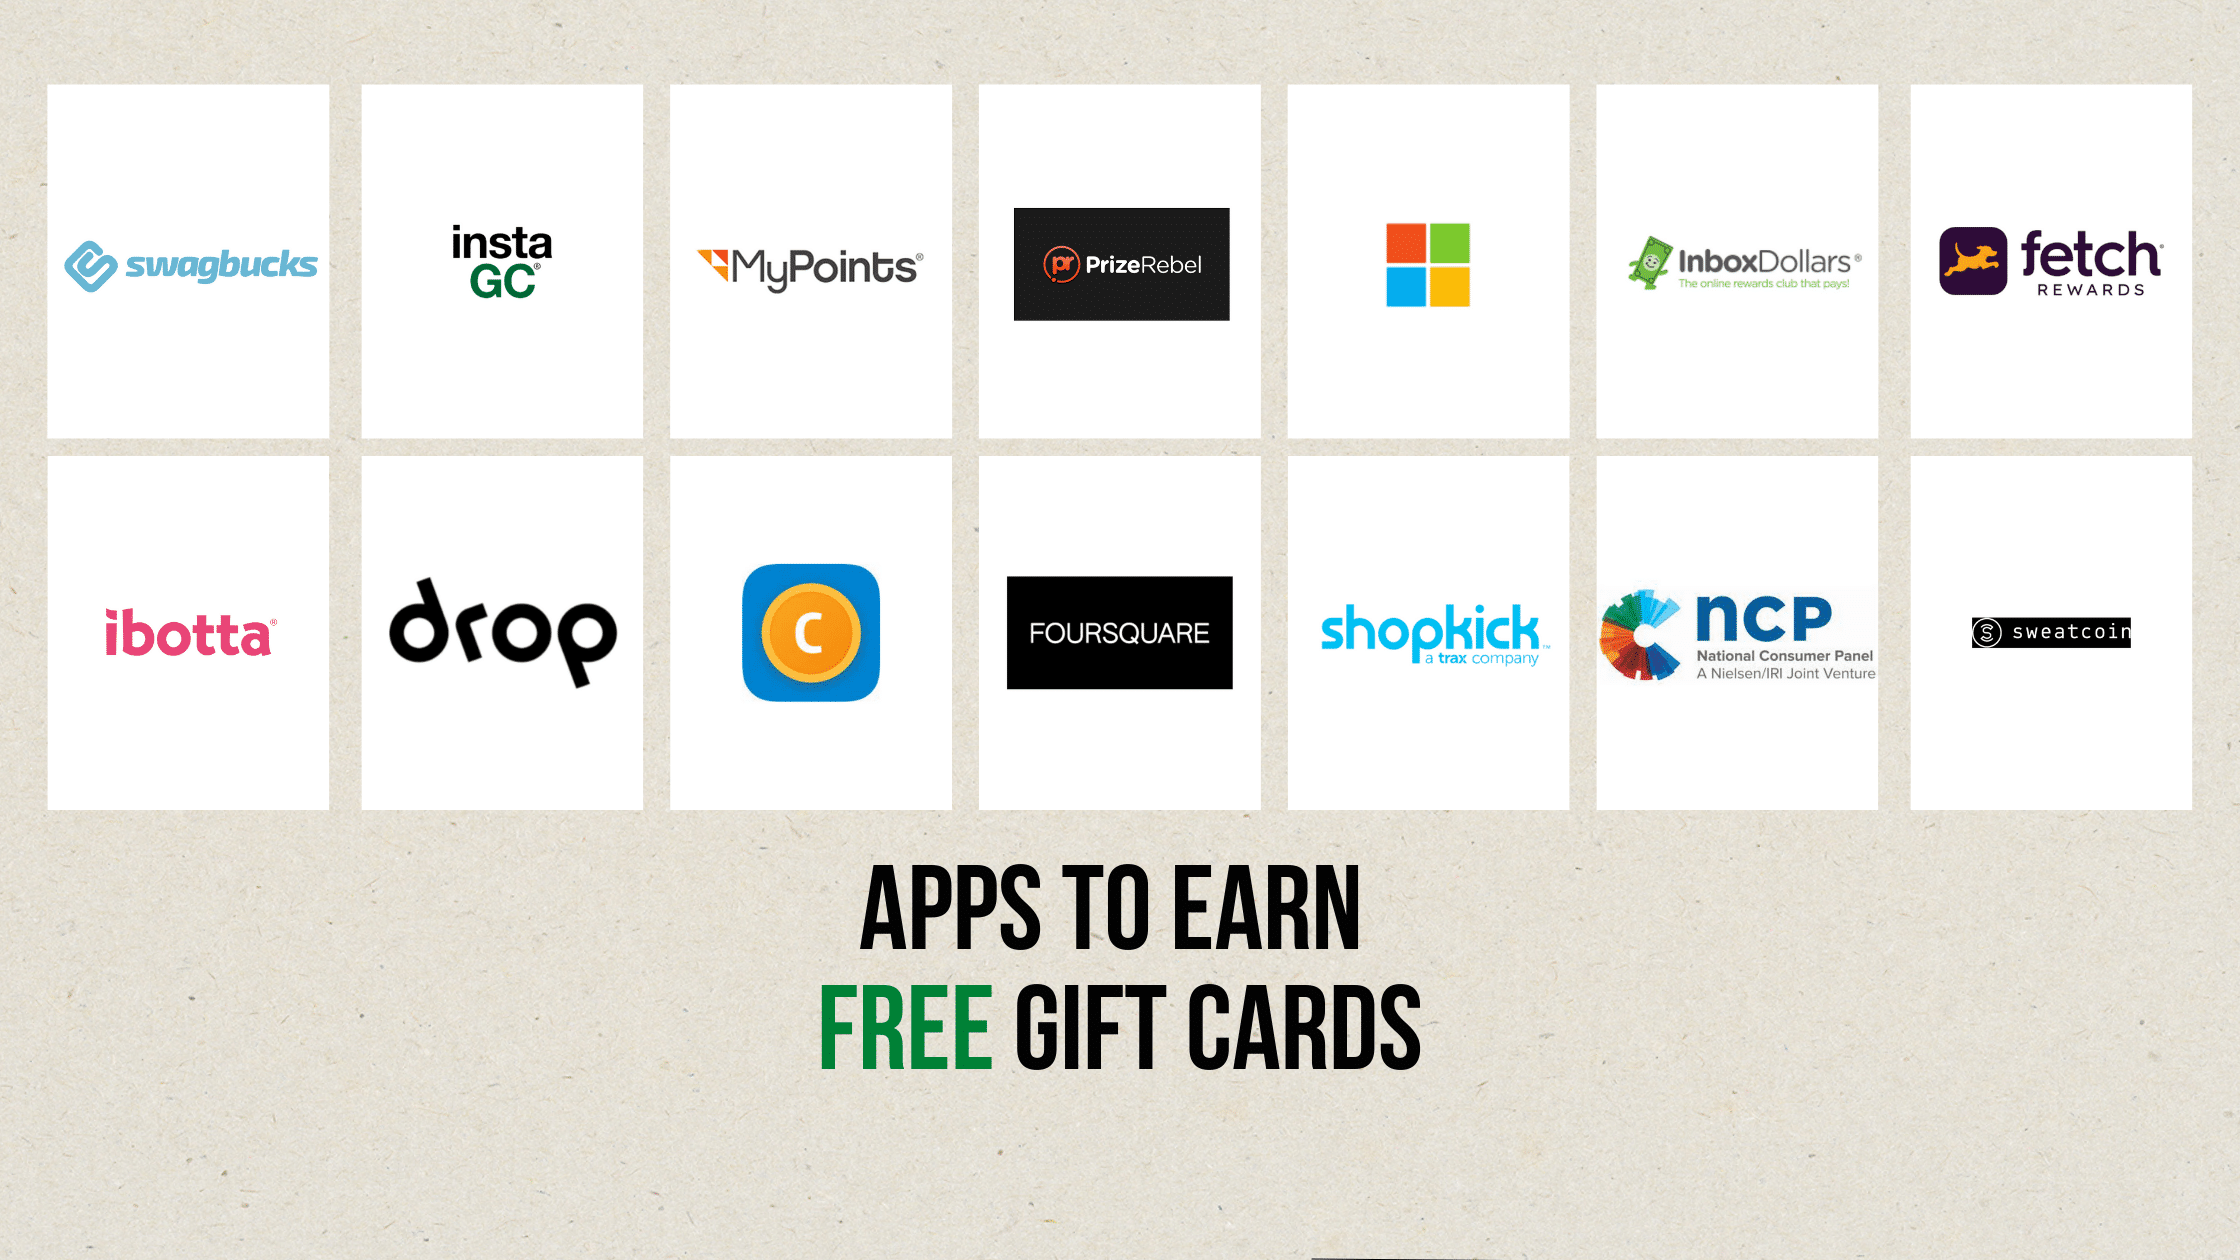 Free gift cards and sweepstakes with Microsoft Rewards